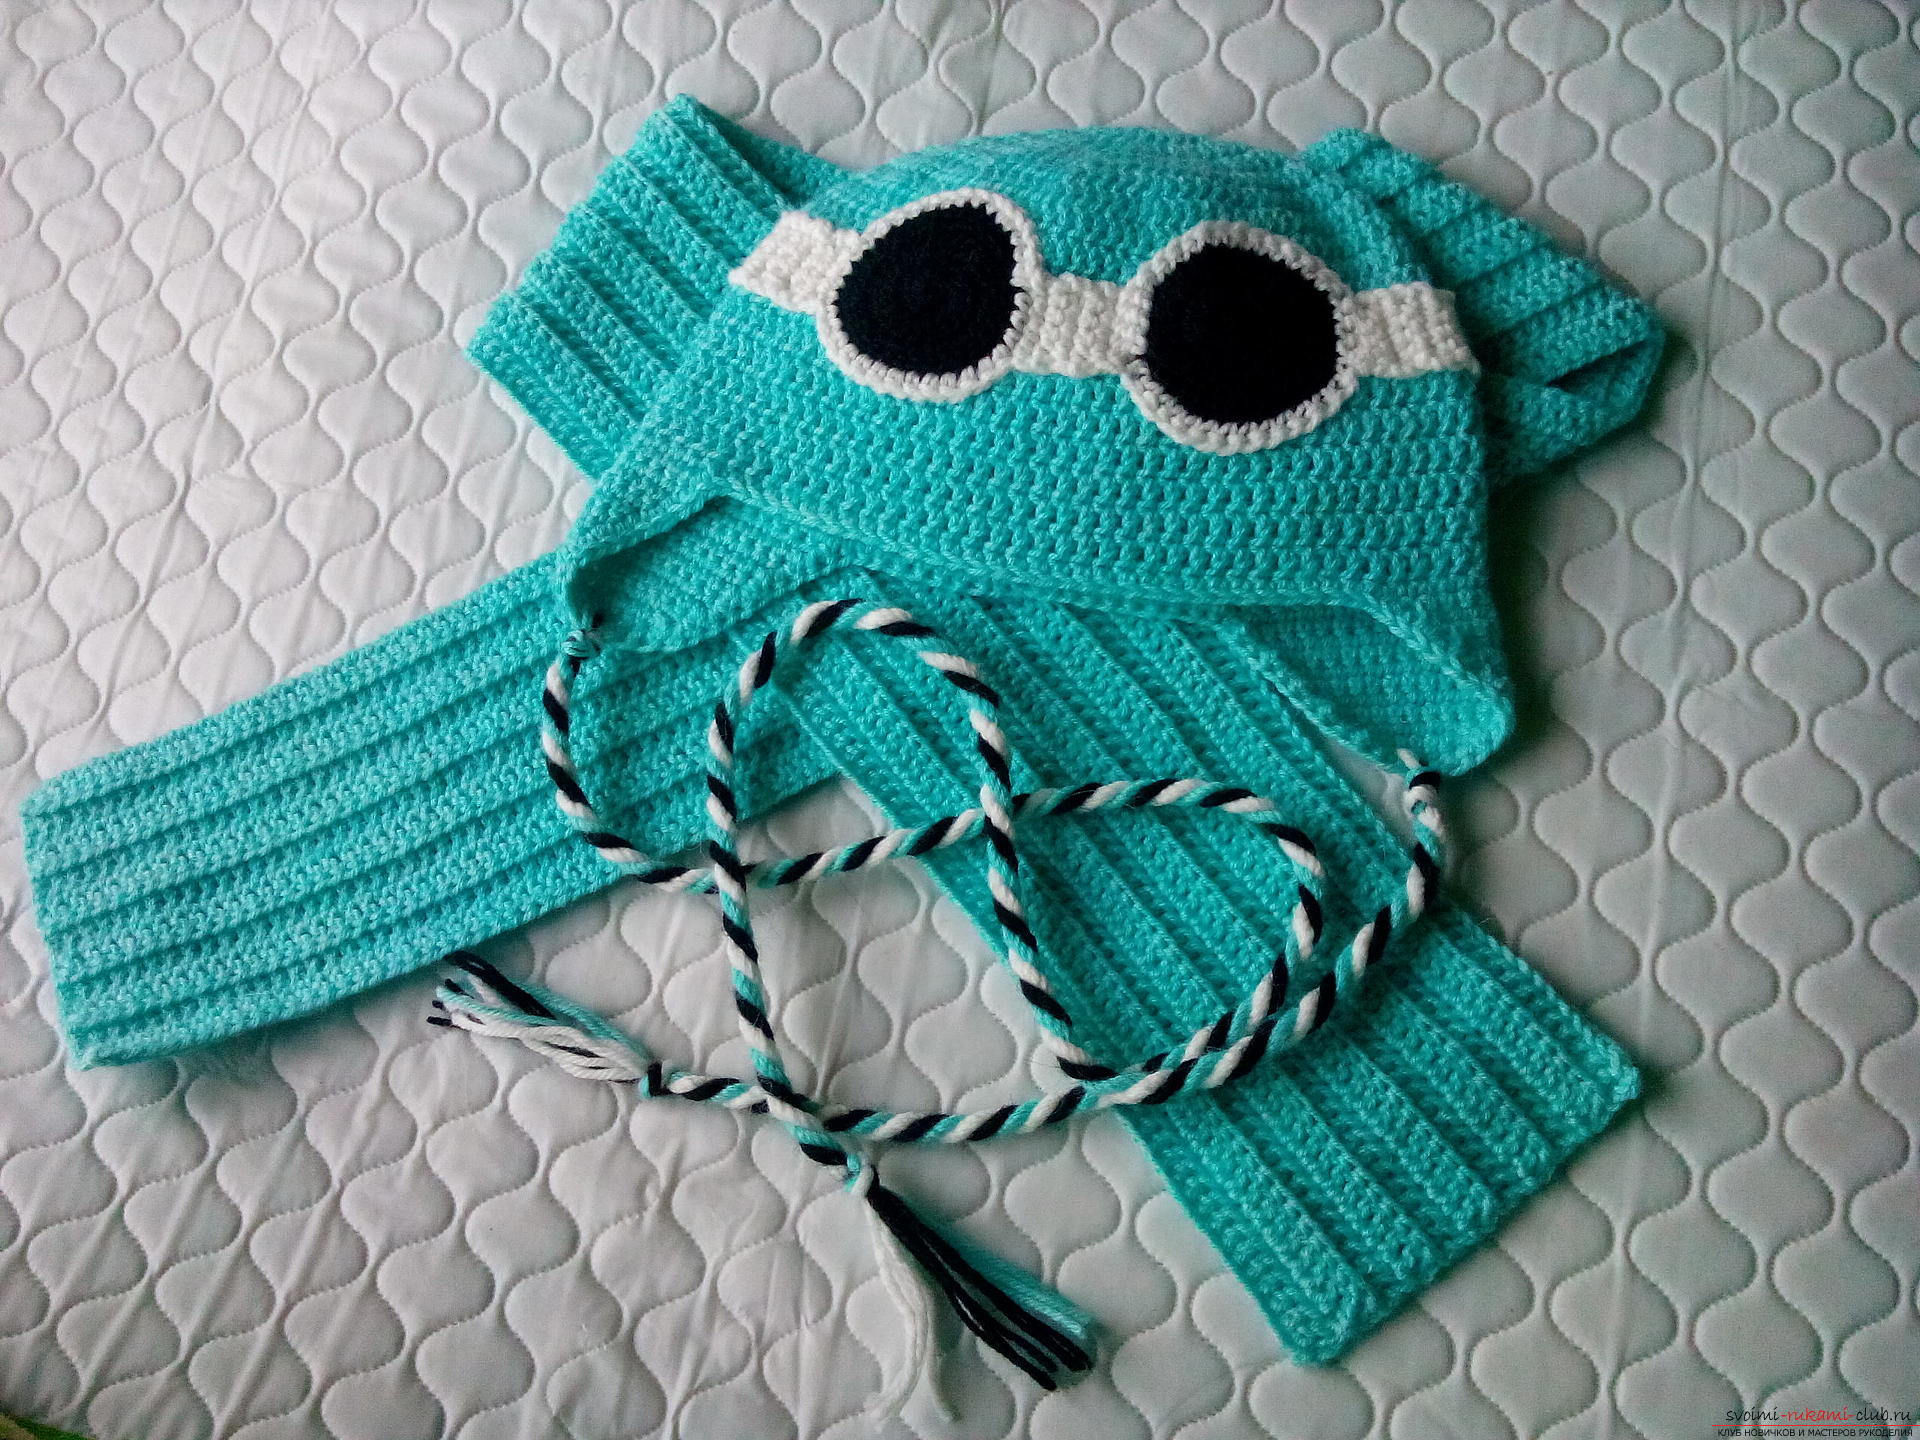 Step-by-step description and photo of the crochet crochet kit for the boy from the cap and scarf. Photo Number 19